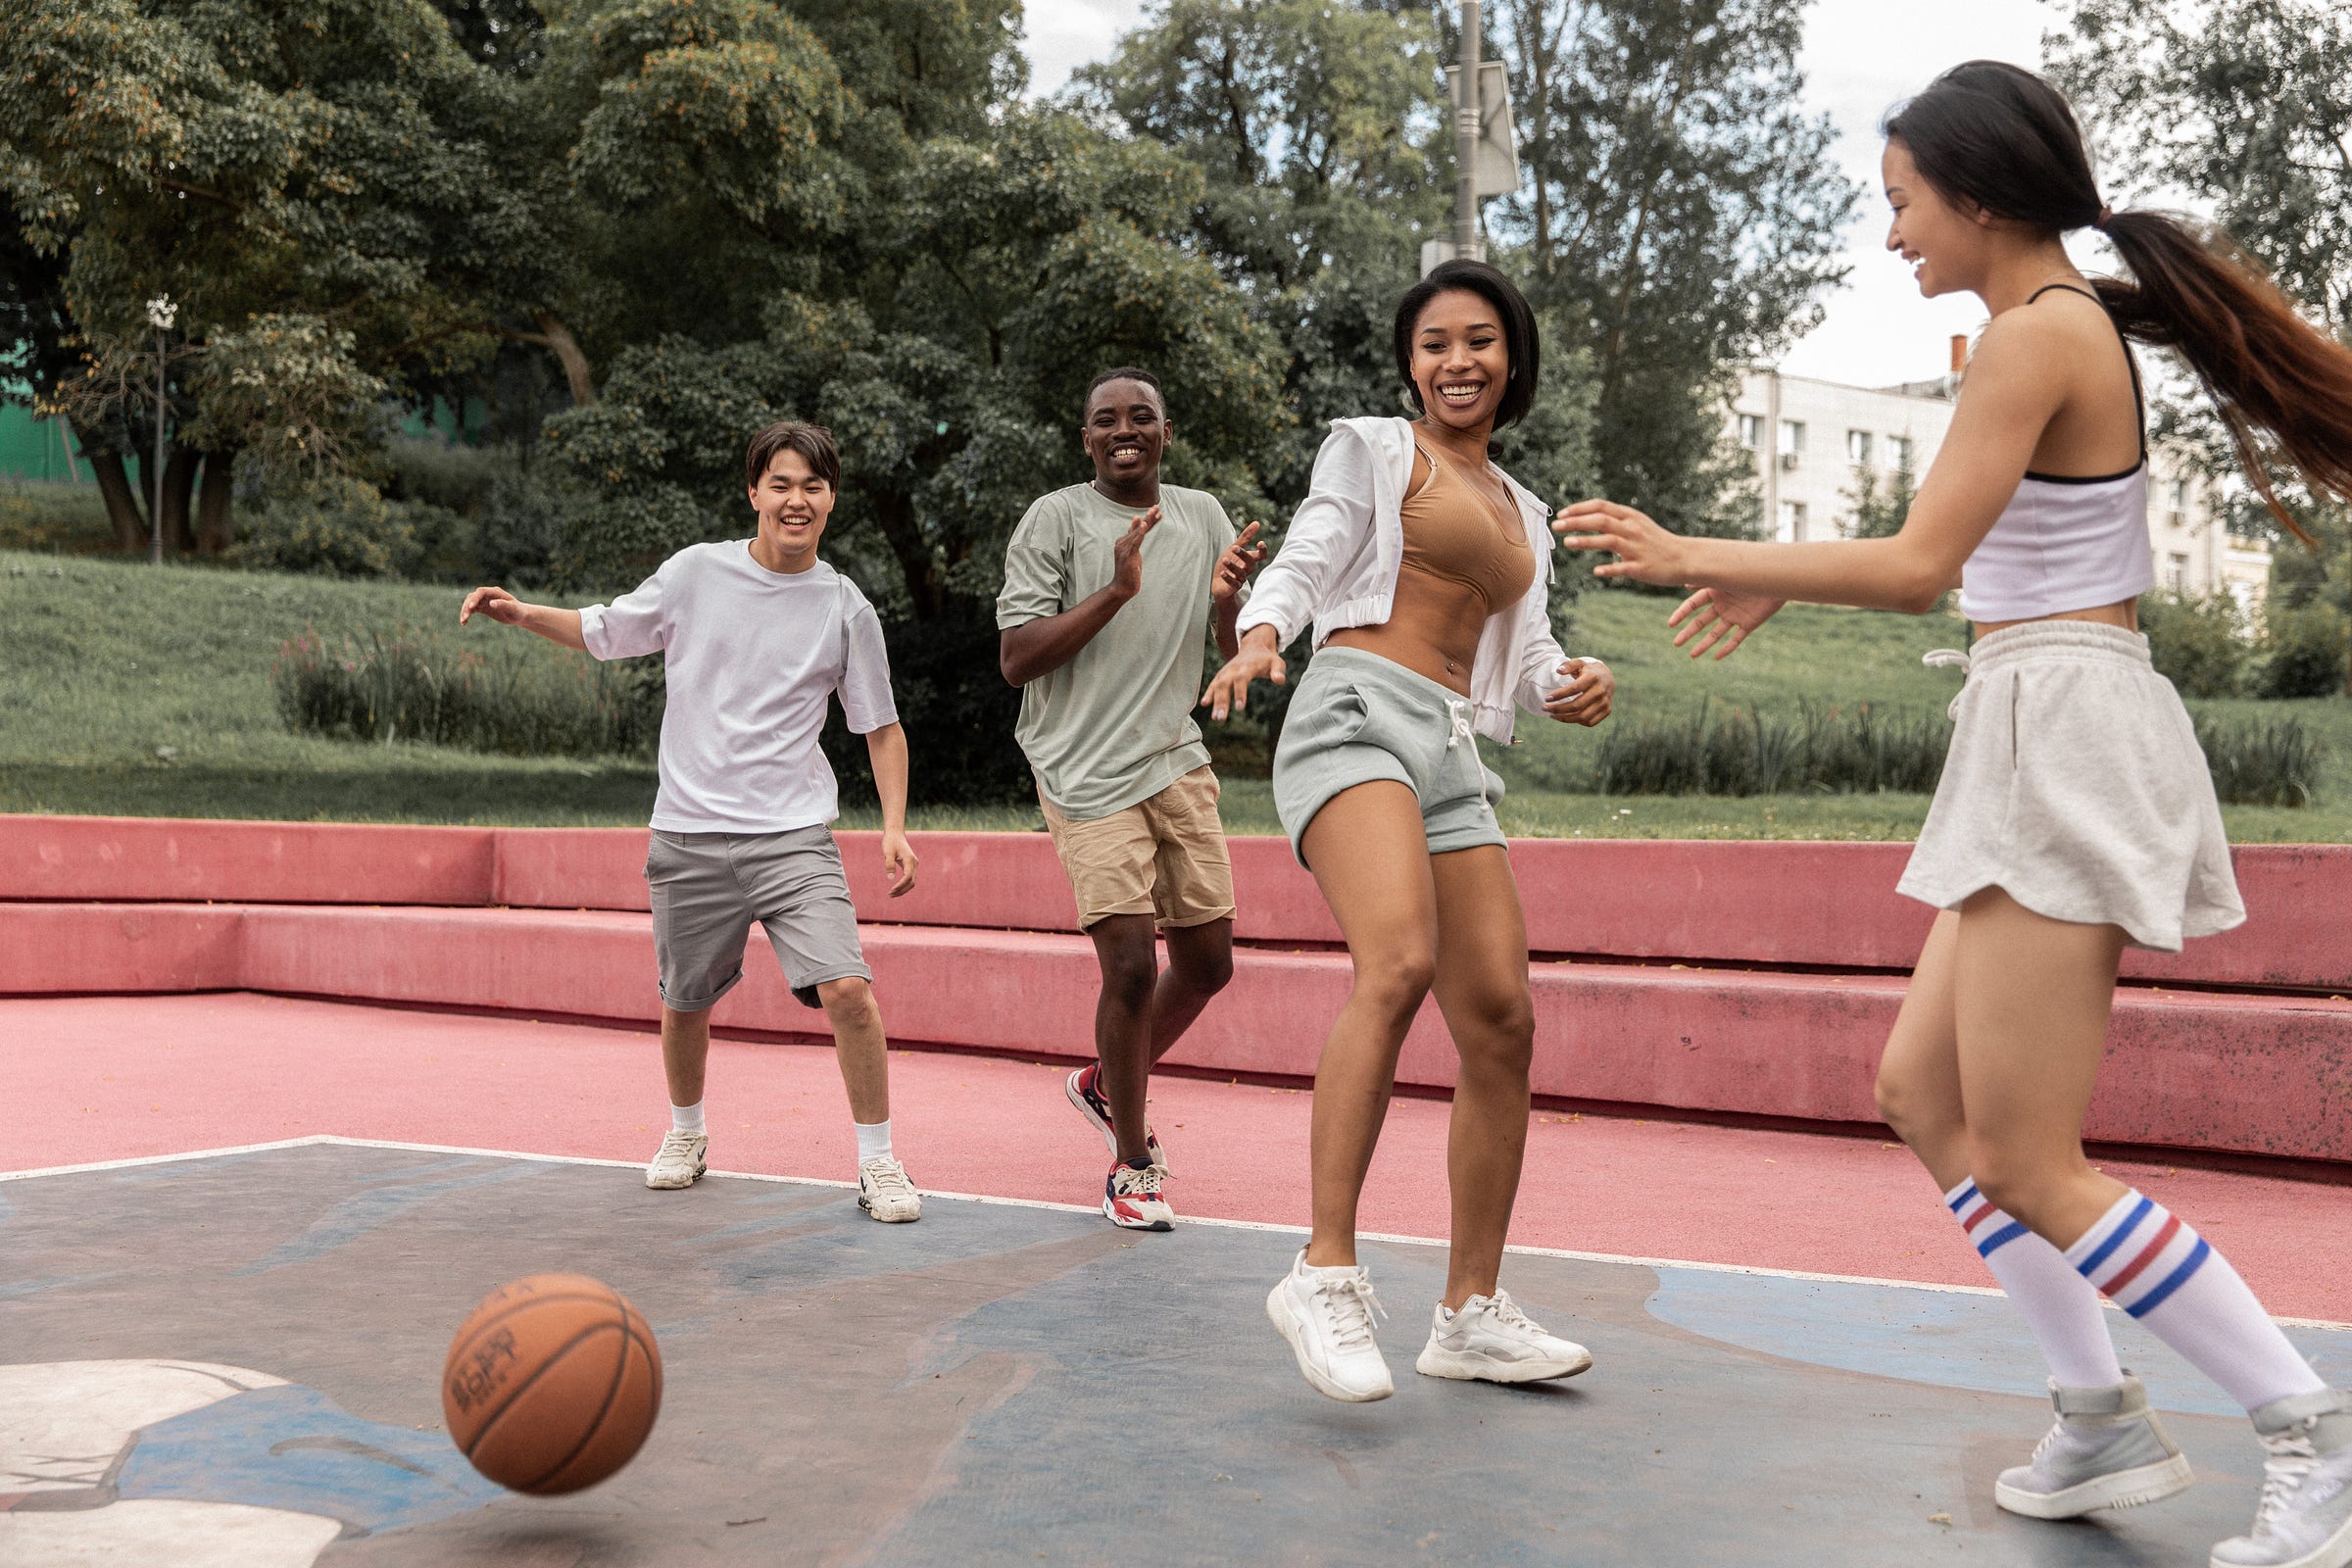 4 people playing sports in a park with a basketball on the floor